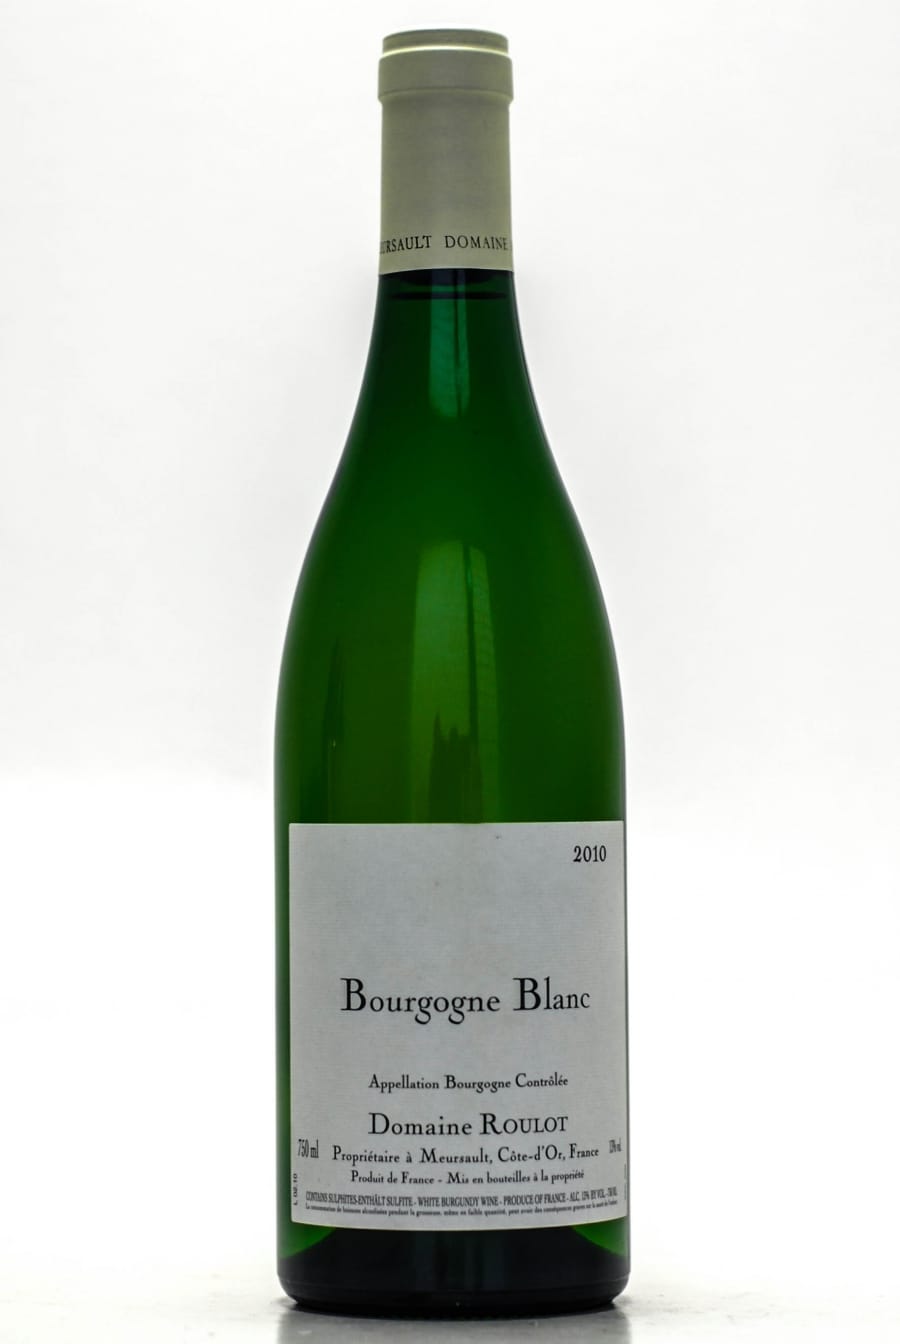 Guy Roulot - Bourgogne Blanc 2010 Perfect